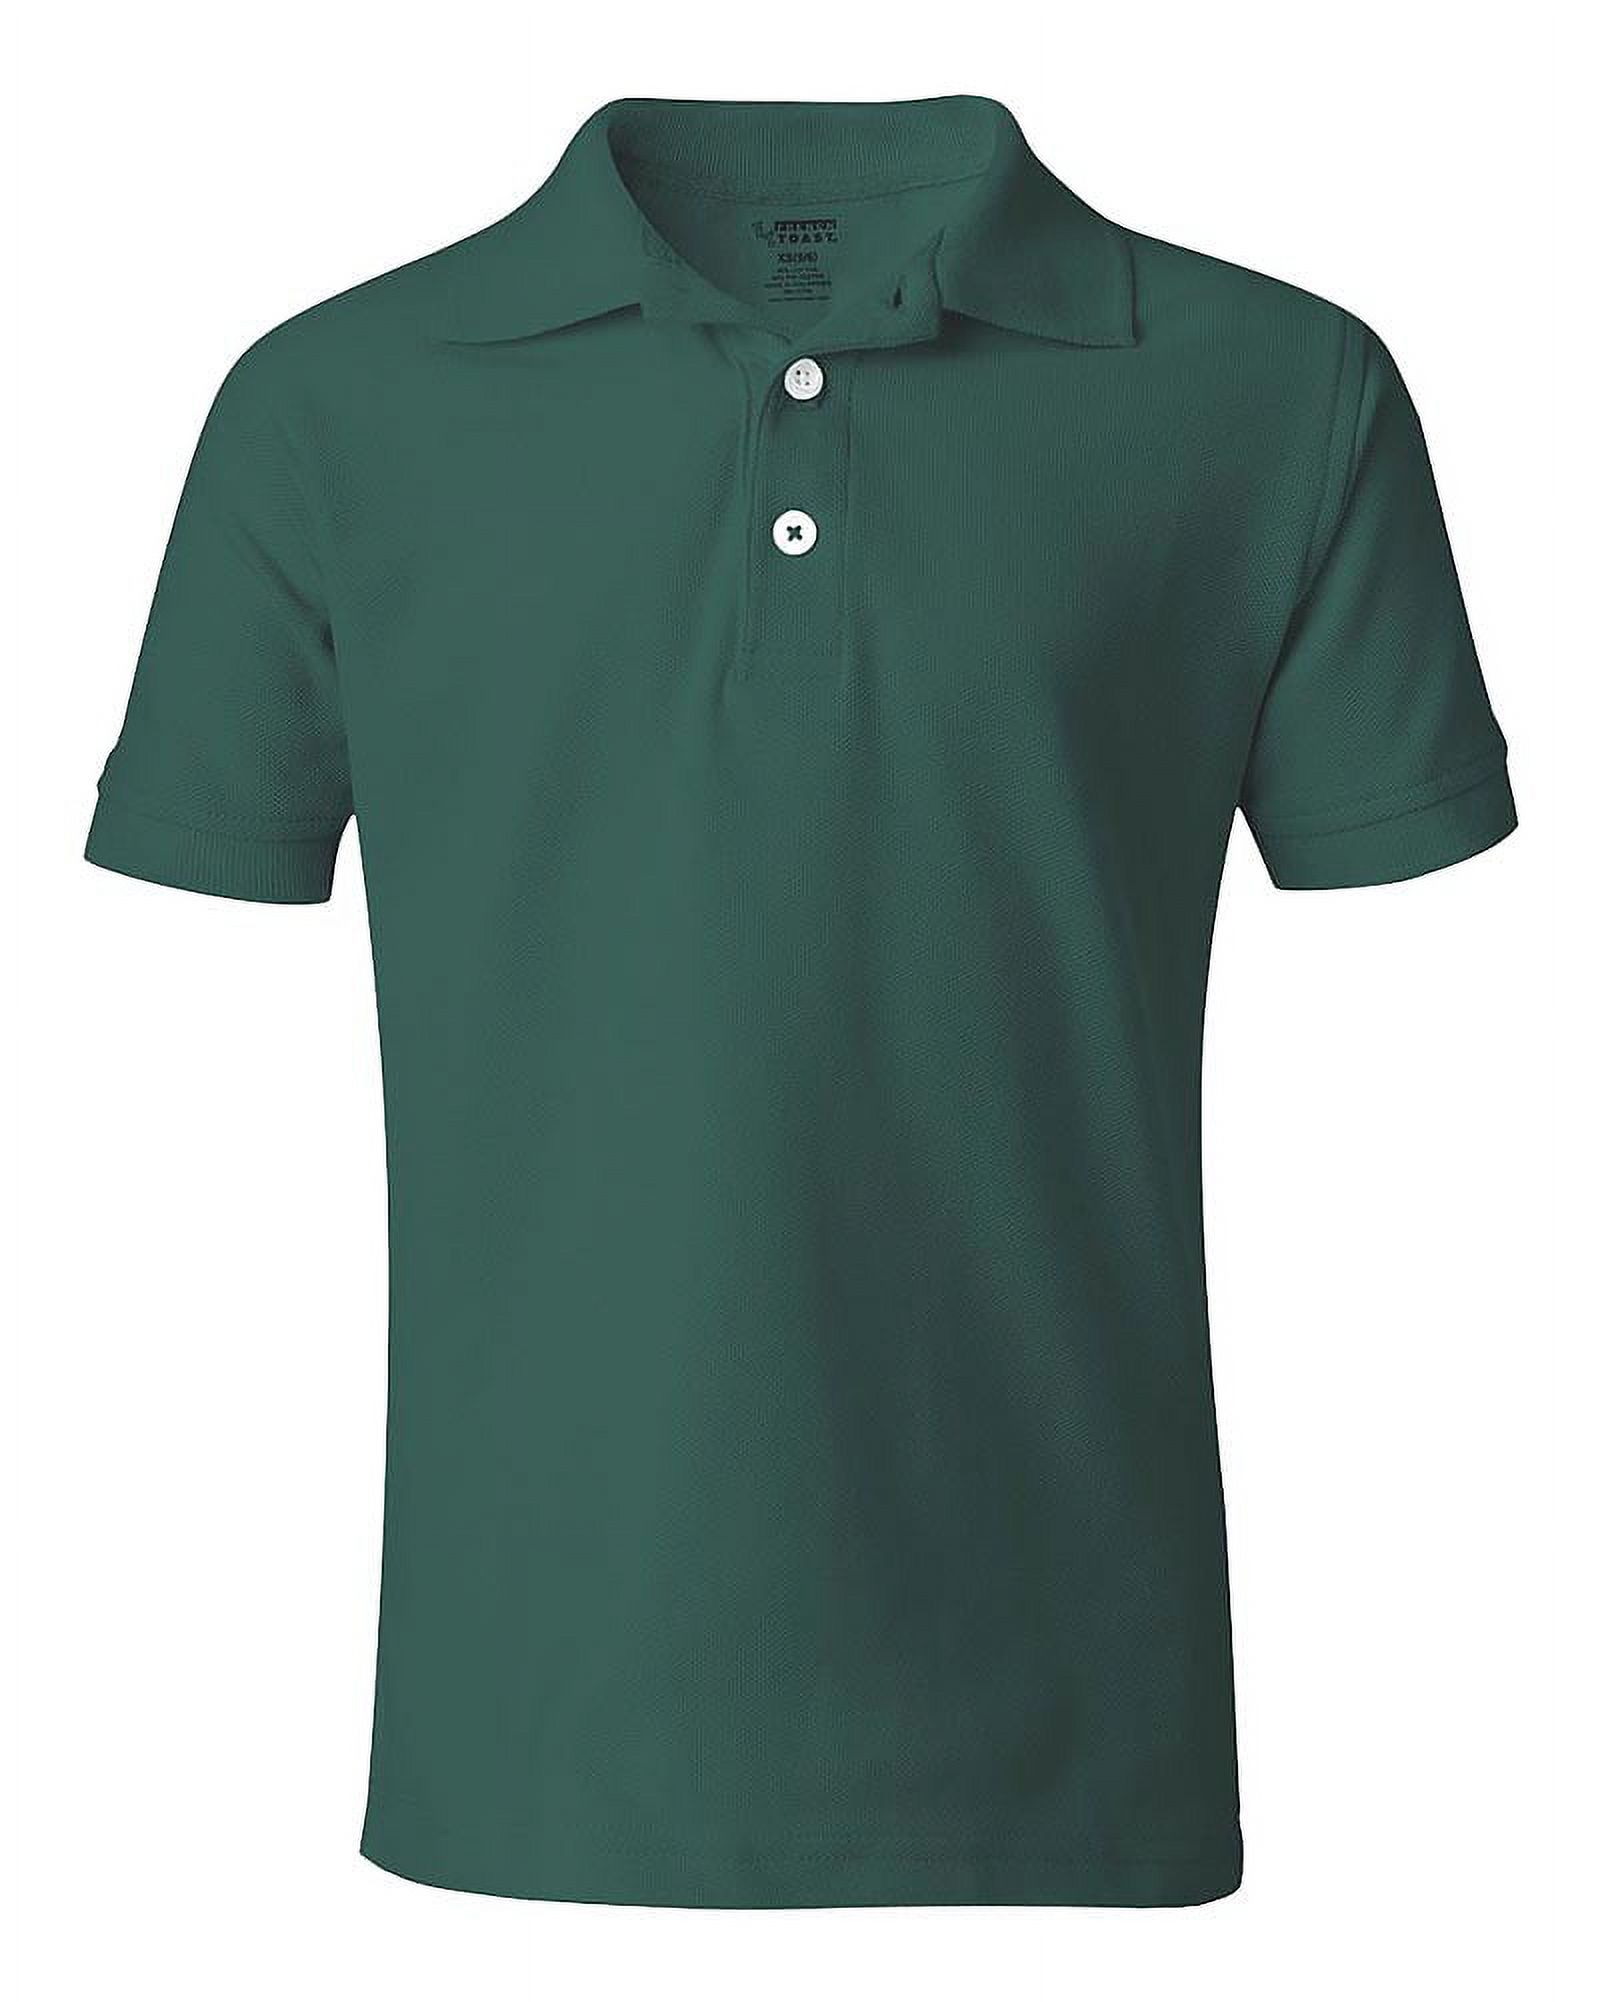 French Toast Unisex S/S Pique Polo - green, 2t (Toddler) - image 2 of 2